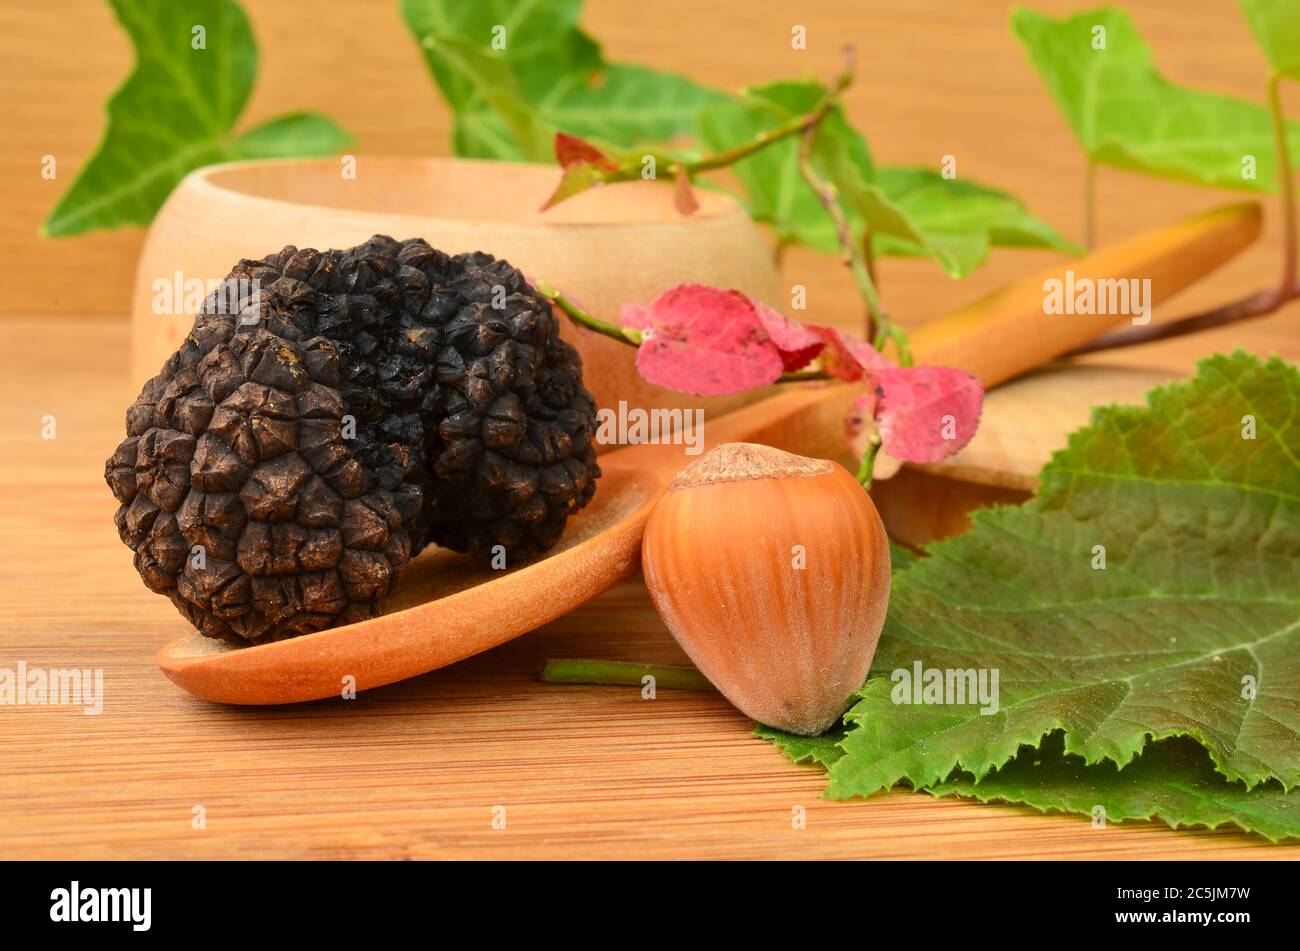 Black truffle in wooden spoon and hazelnut on wooden background, decorated with some green and red leaves Stock Photo